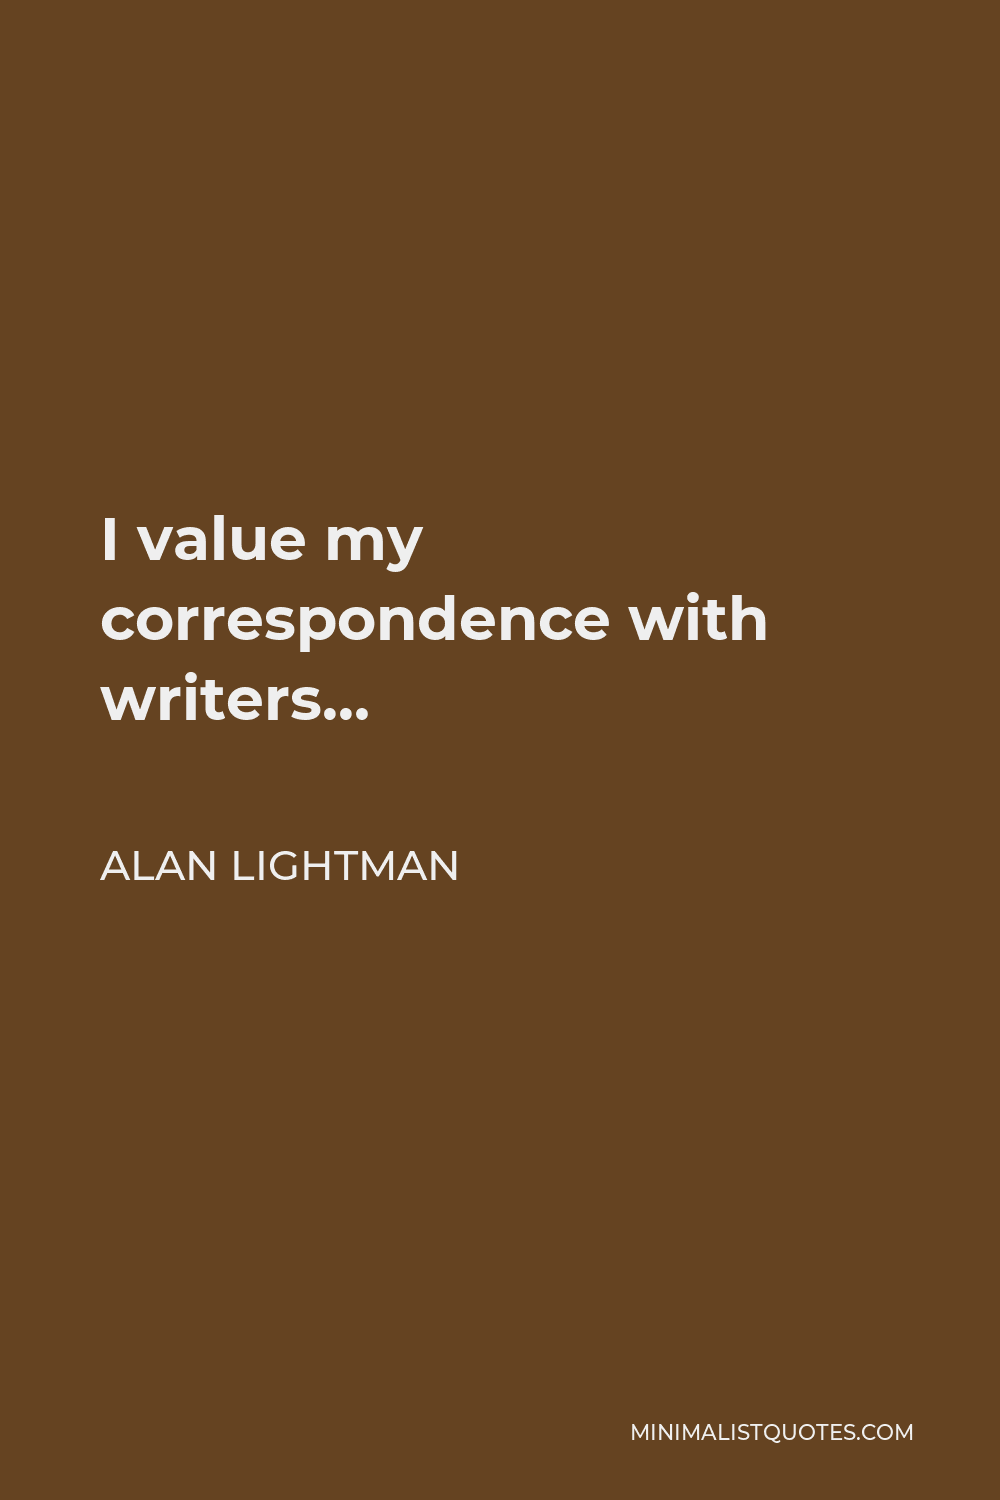 Alan Lightman Quote - I value my correspondence with writers…